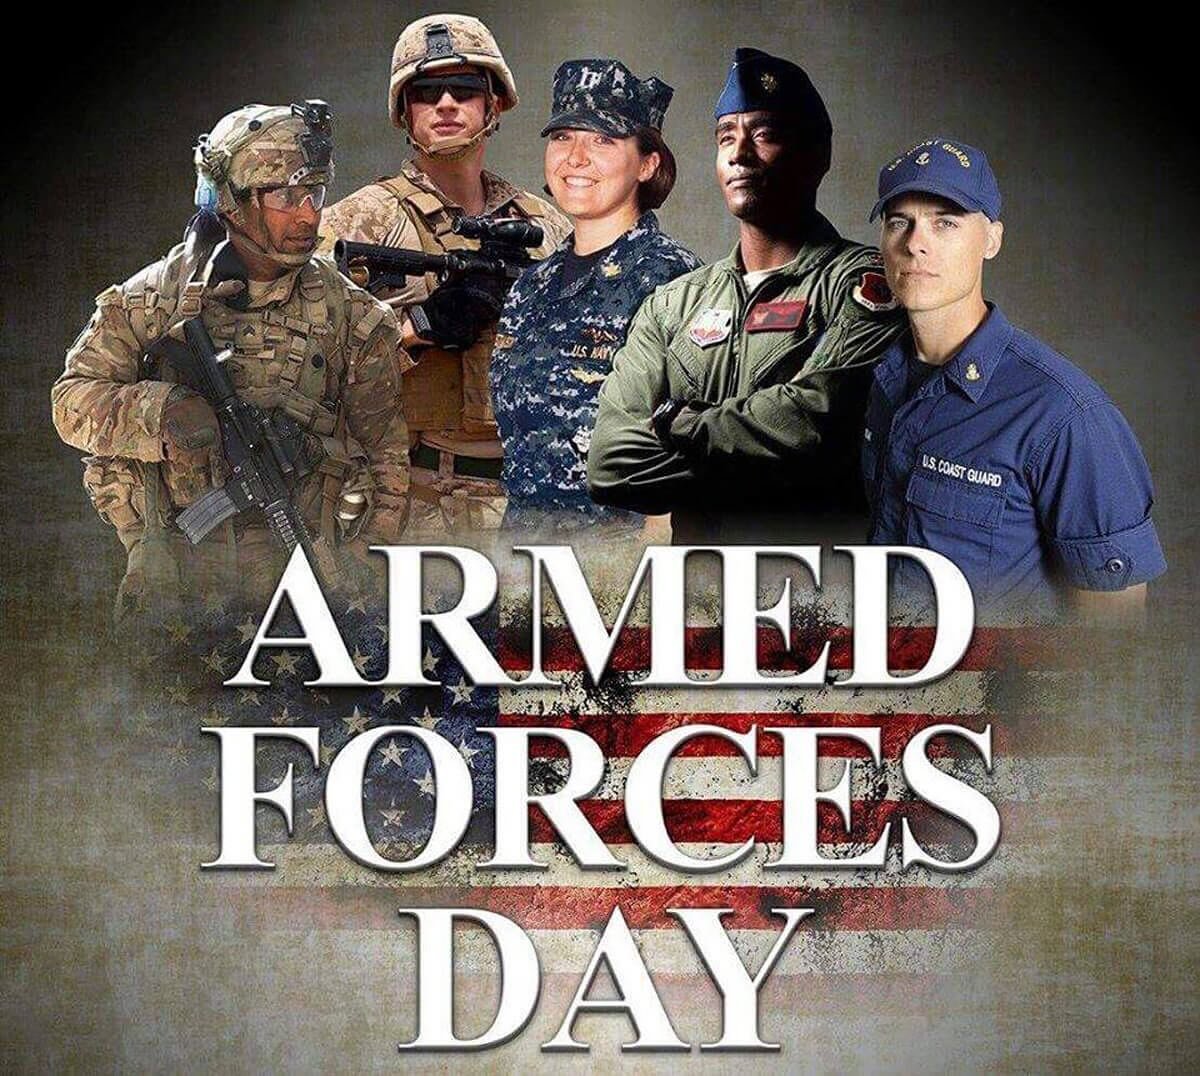 Today, we honor the brave men and women of our Armed Forces who selflessly protect our freedom and way of life. Your dedication, sacrifice, and courage are an inspiration to us all. Thank you for your unwavering service. #ArmedForcesDay #SupportOurTr